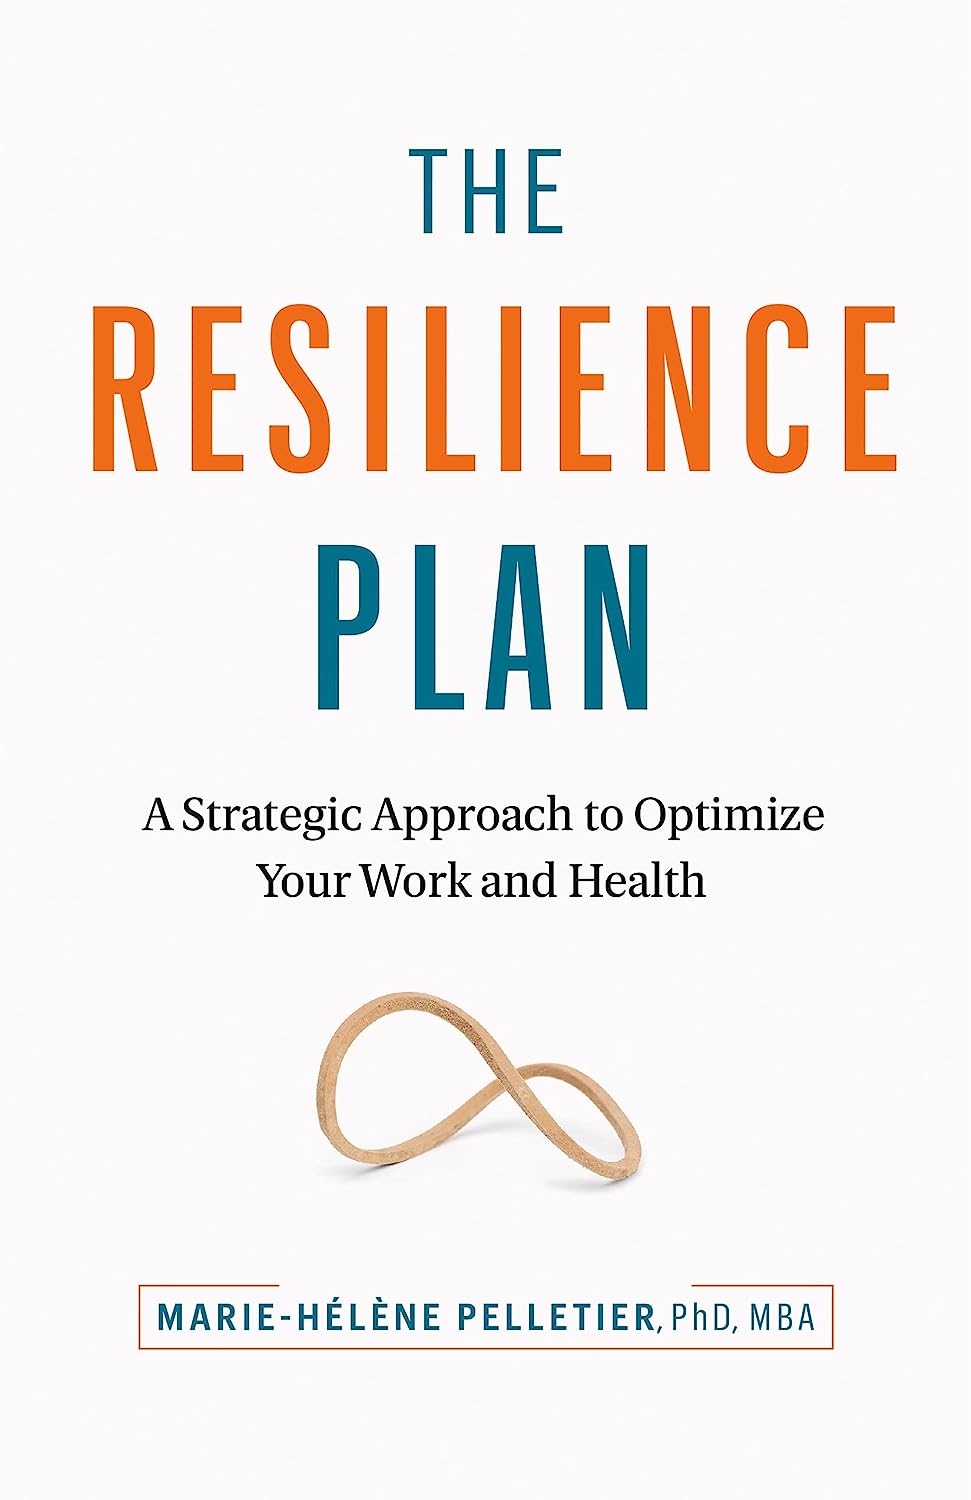 Approach　Optimizing　Resilience　and　to　The　Performance　Plan:　BookPal　Your　A　Strategic　Health　Work　Mental